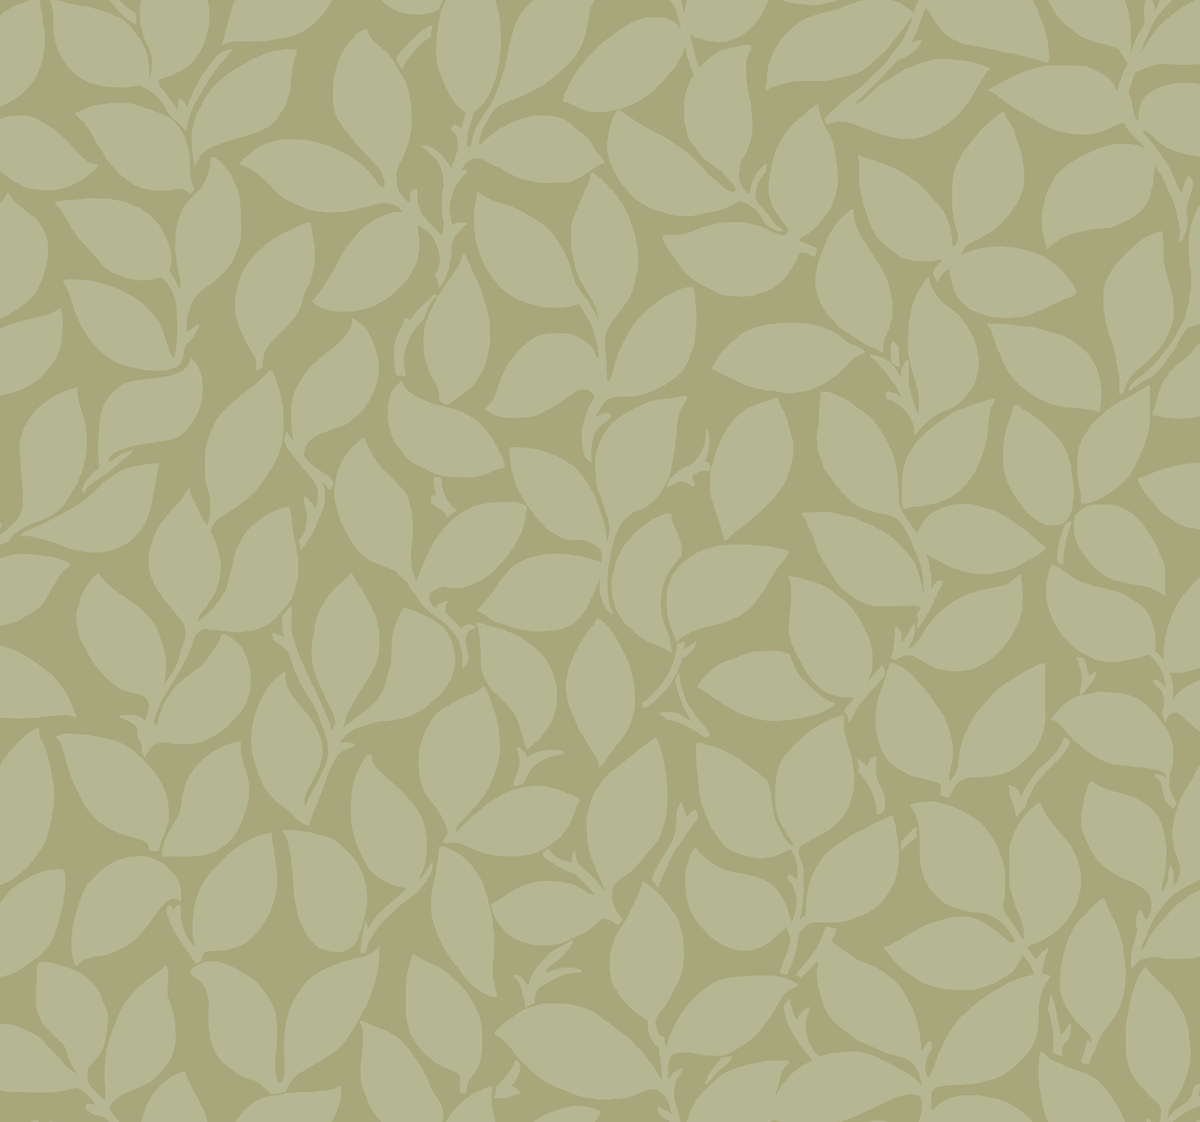 Leaf and Vine Wallpaper - Sage |Wallpaper And Borders |The Mural Store